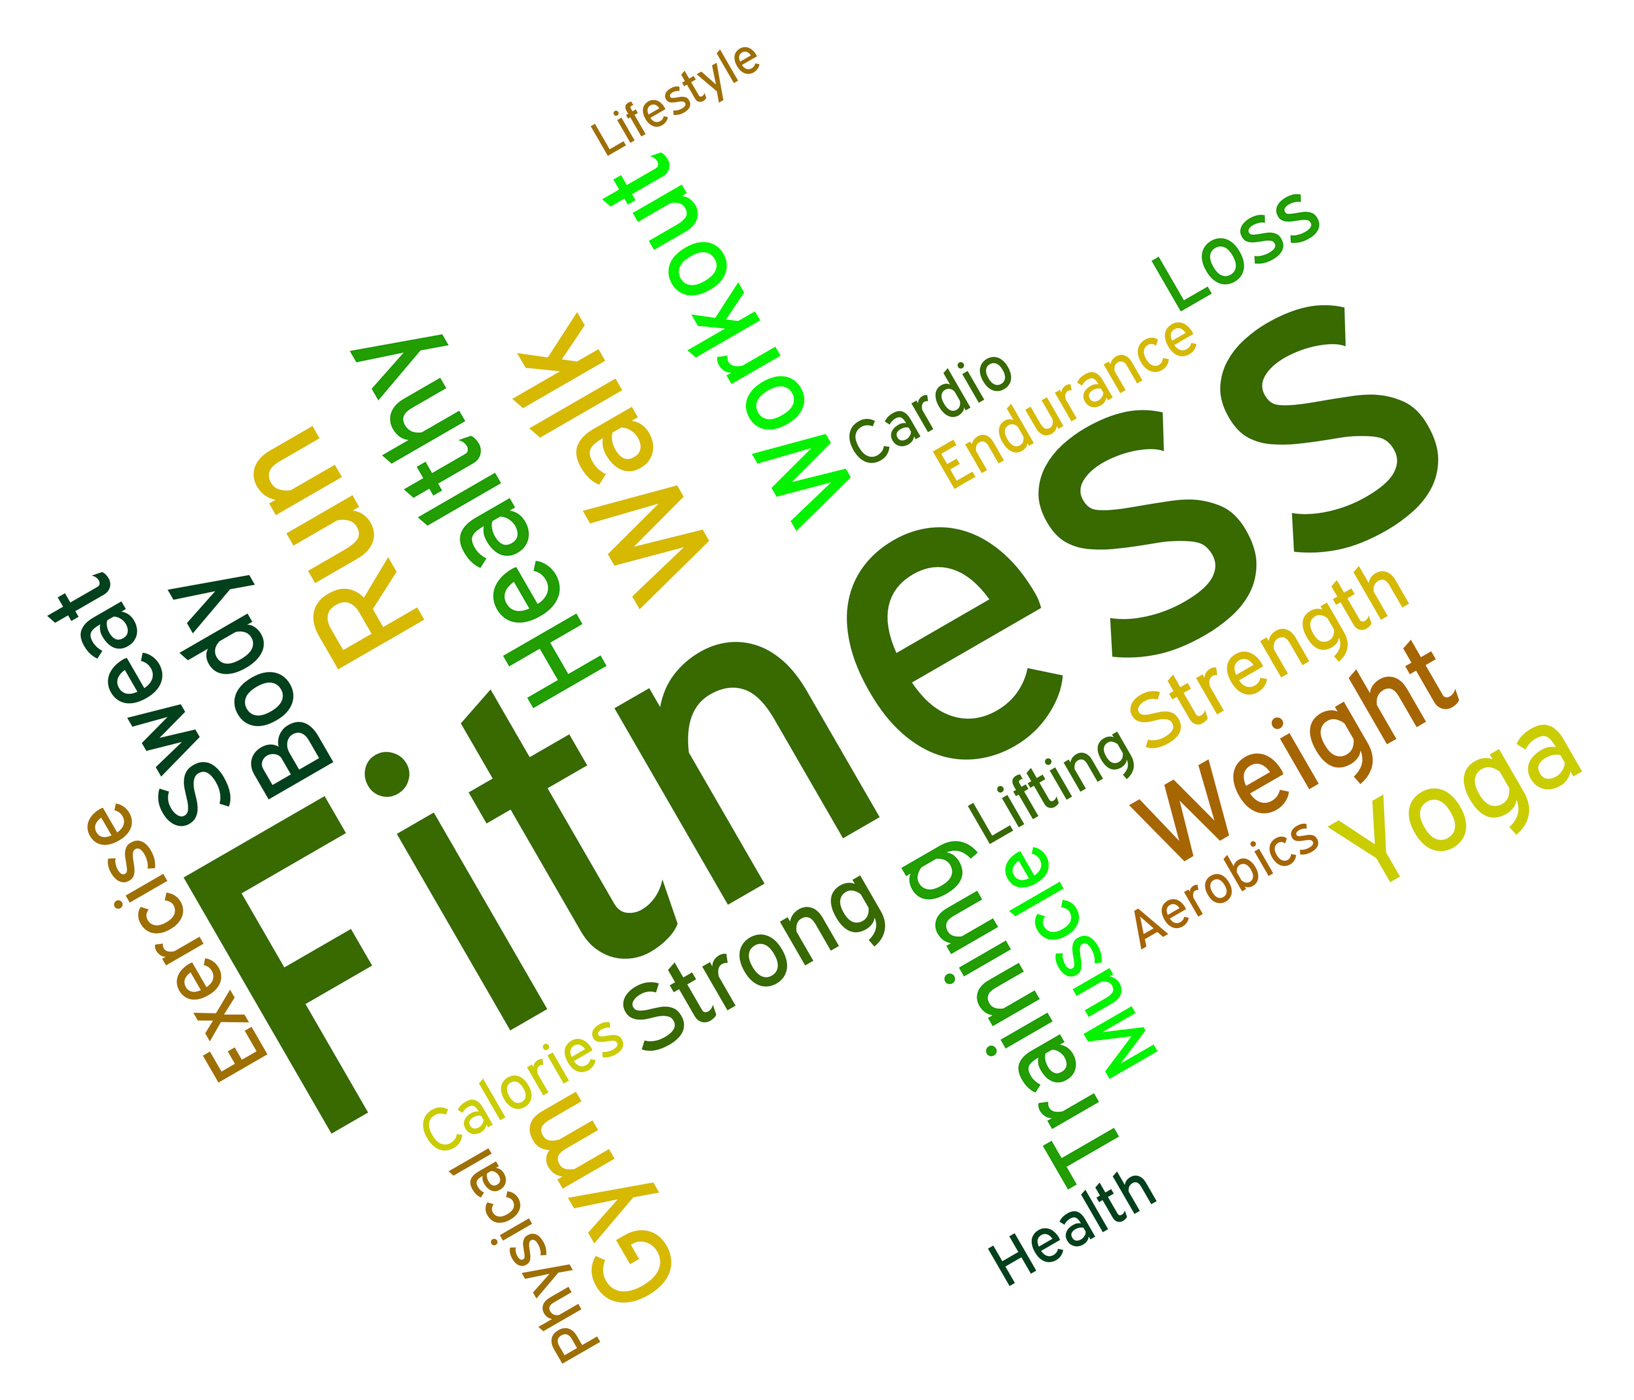 Fitness words means physical activity and exercise photo